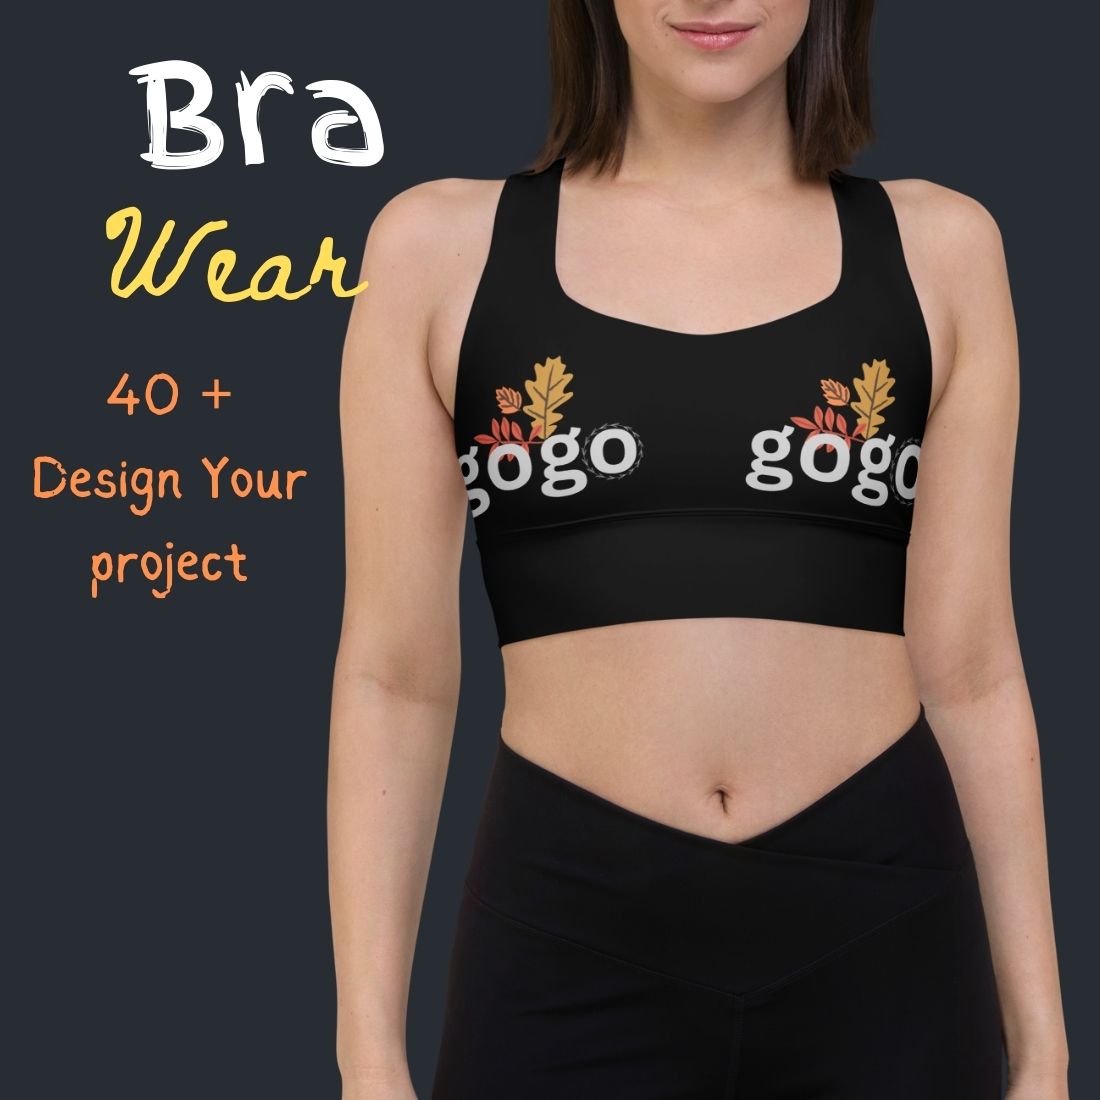 Bra Design for Ladies wear at Dating /Beach / Night / Daily Purpose / Anniversary / Couple preview image.